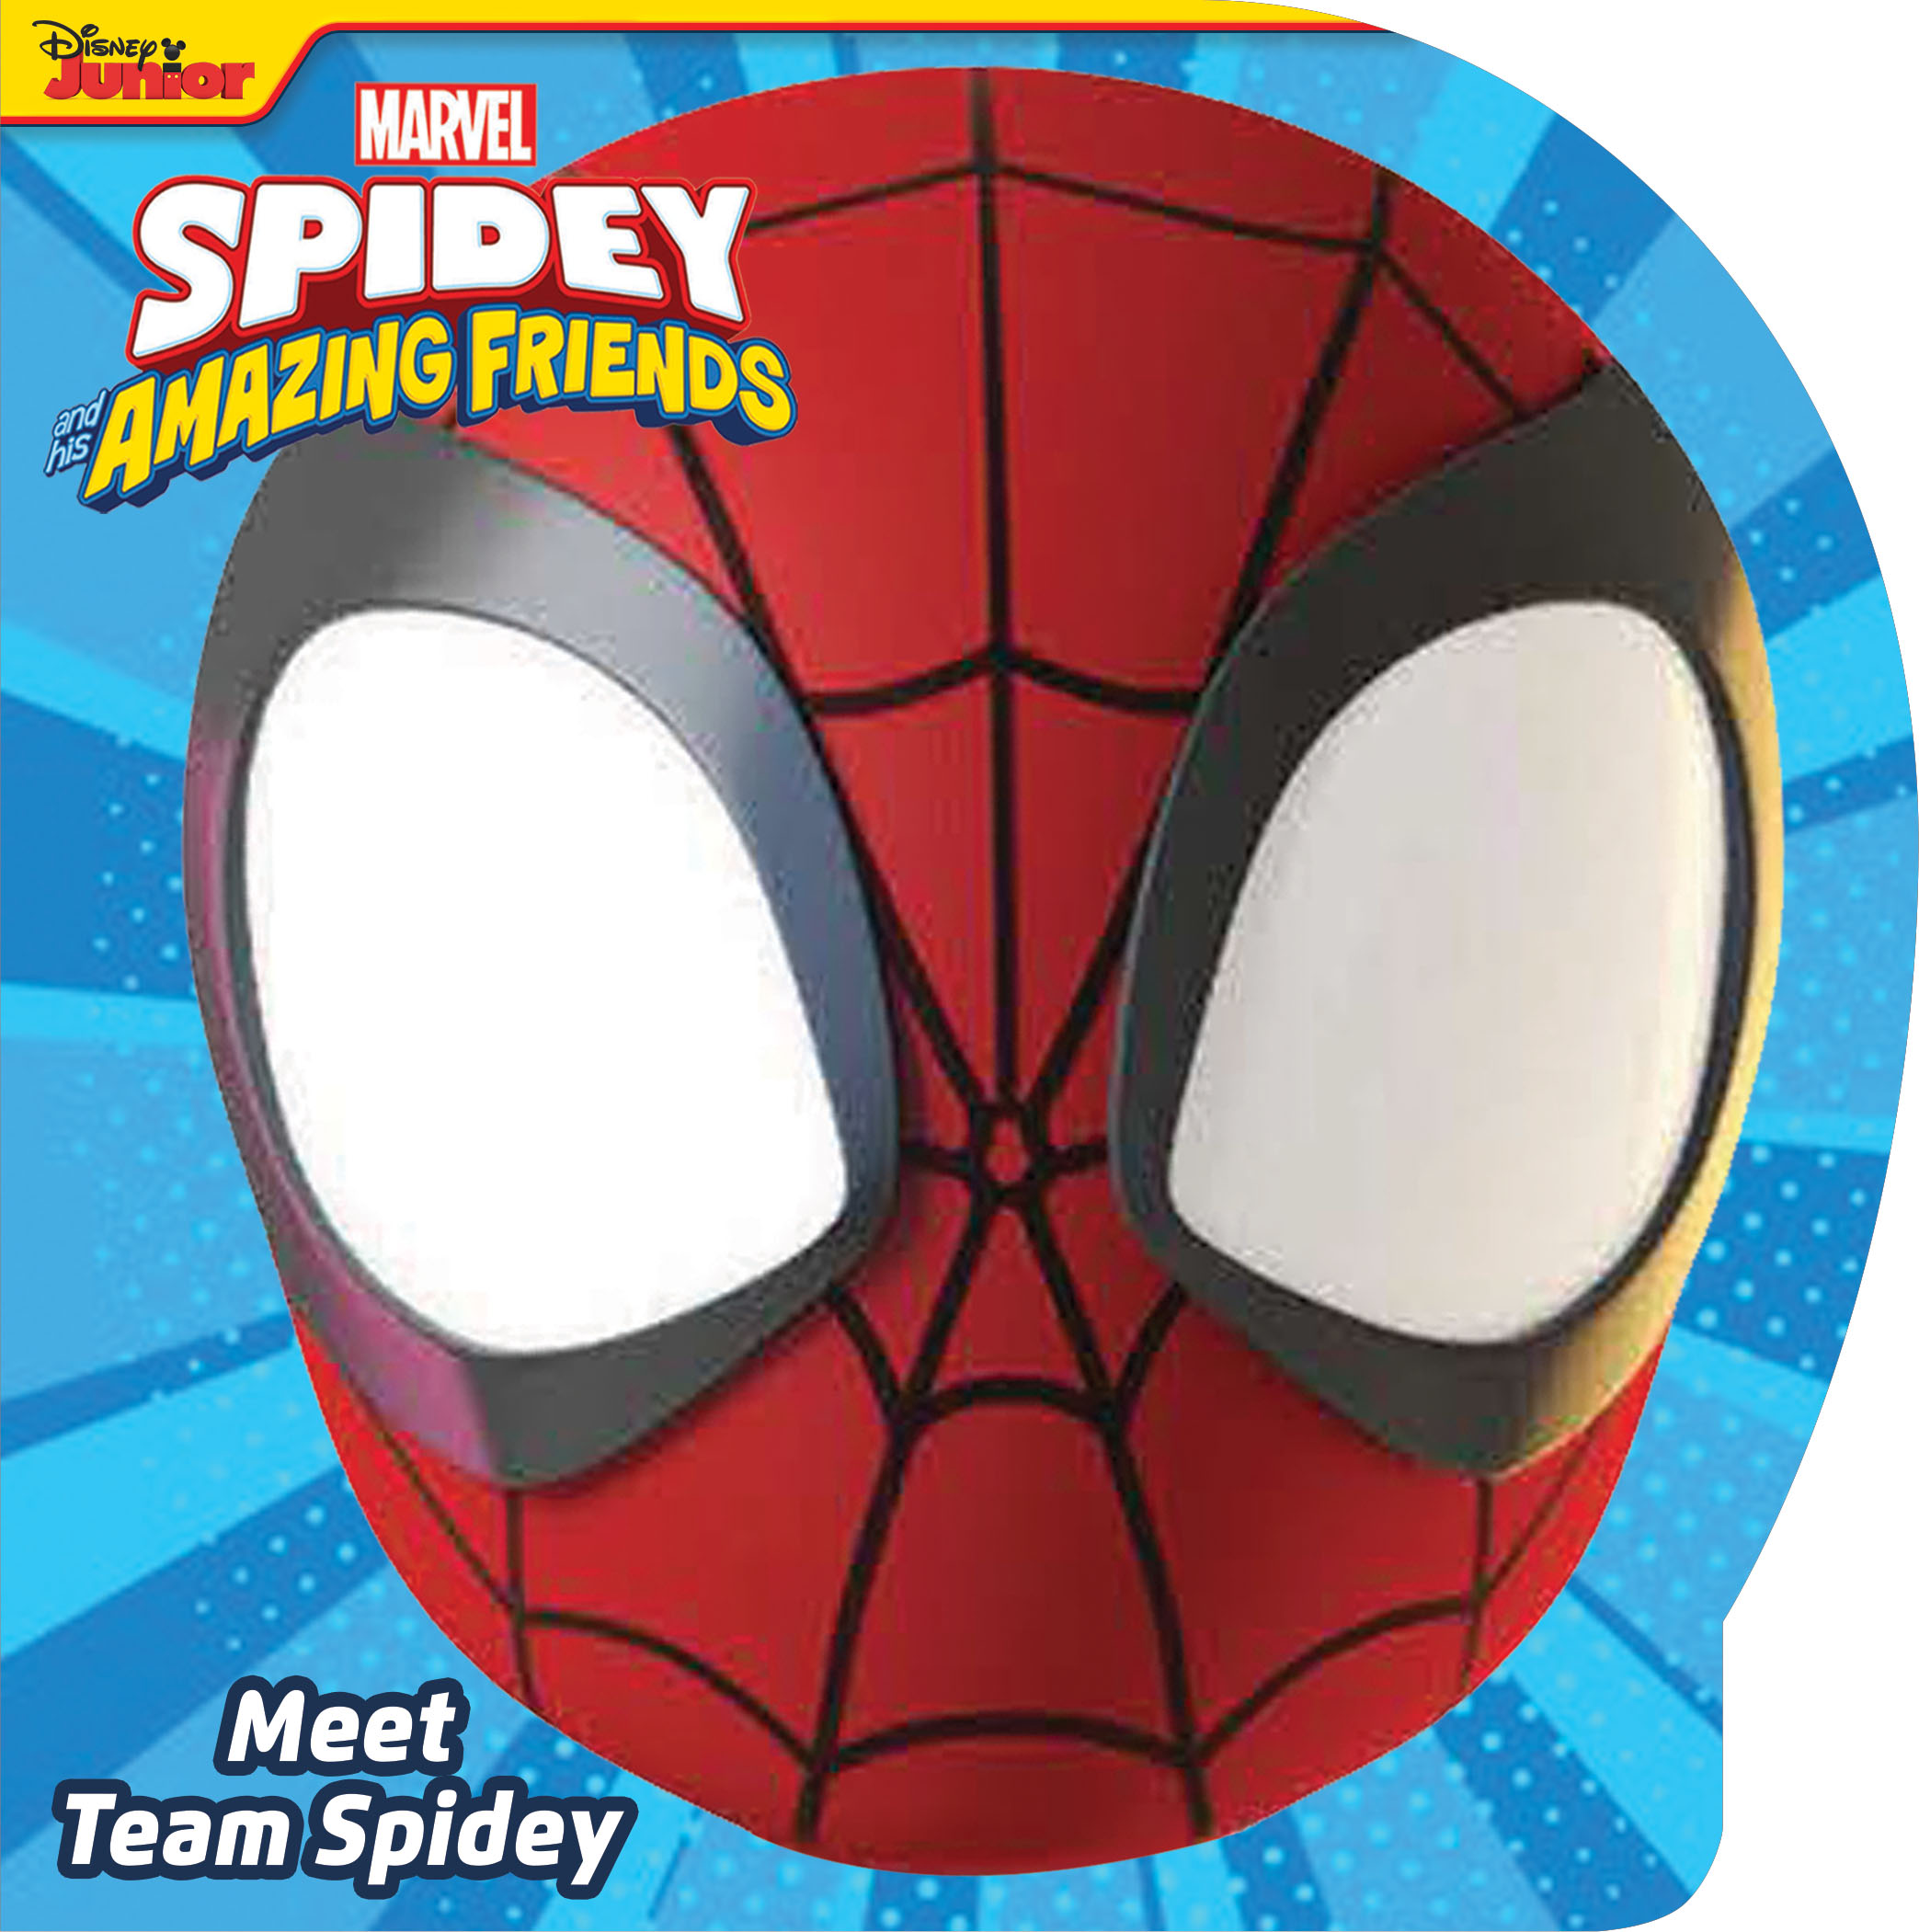 Spidey and His Amazing Friends: Team Spidey Does It All!: My First Comic  Reader! by Disney Books, Paperback